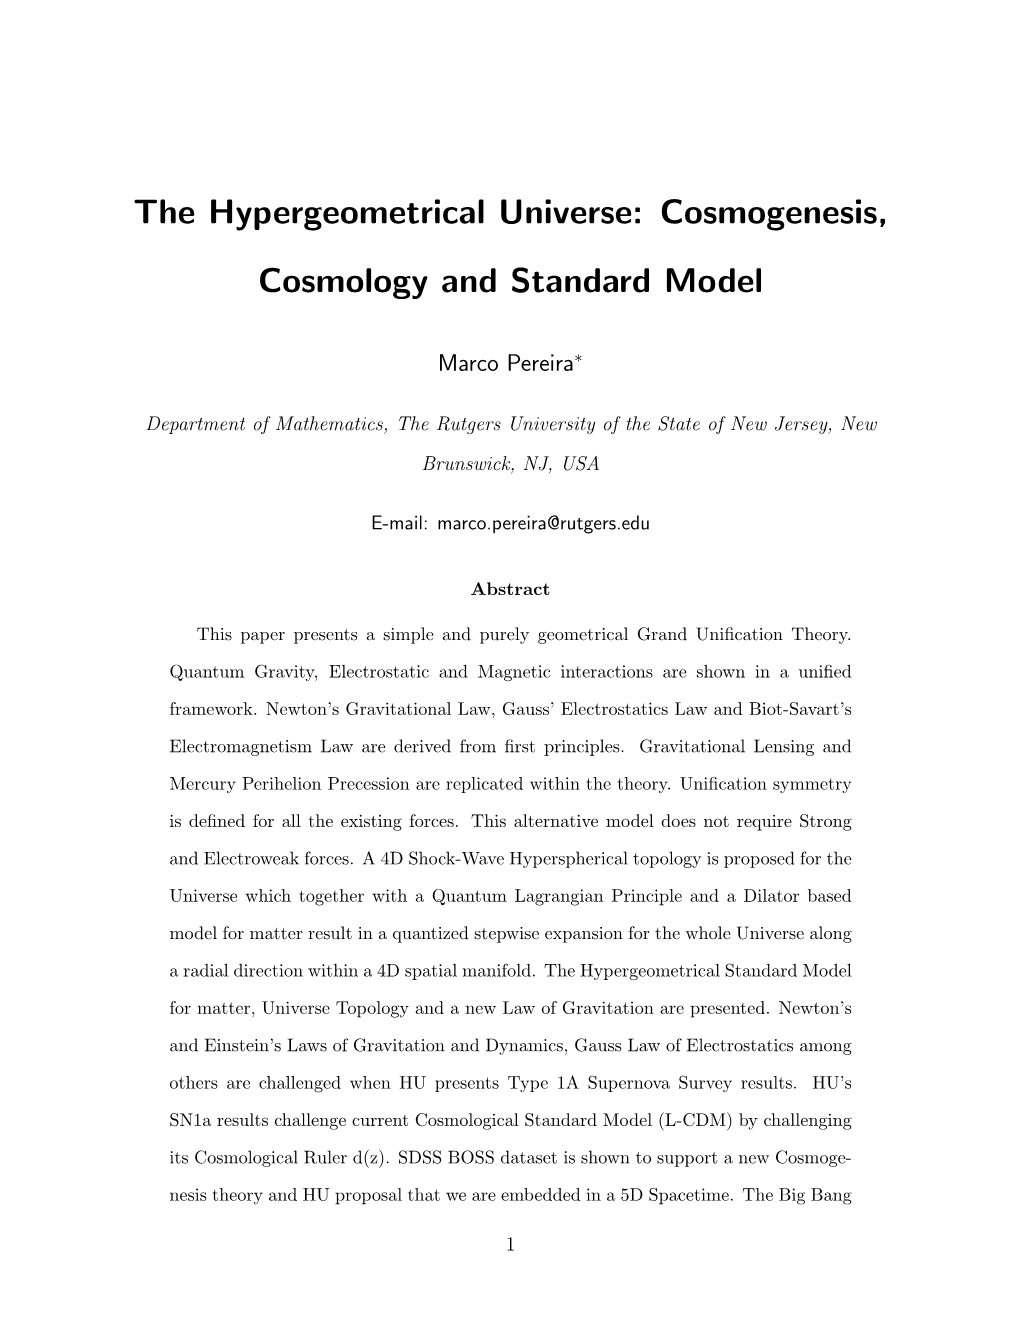 The Hypergeometrical Universe: Cosmogenesis, Cosmology and Standard Model